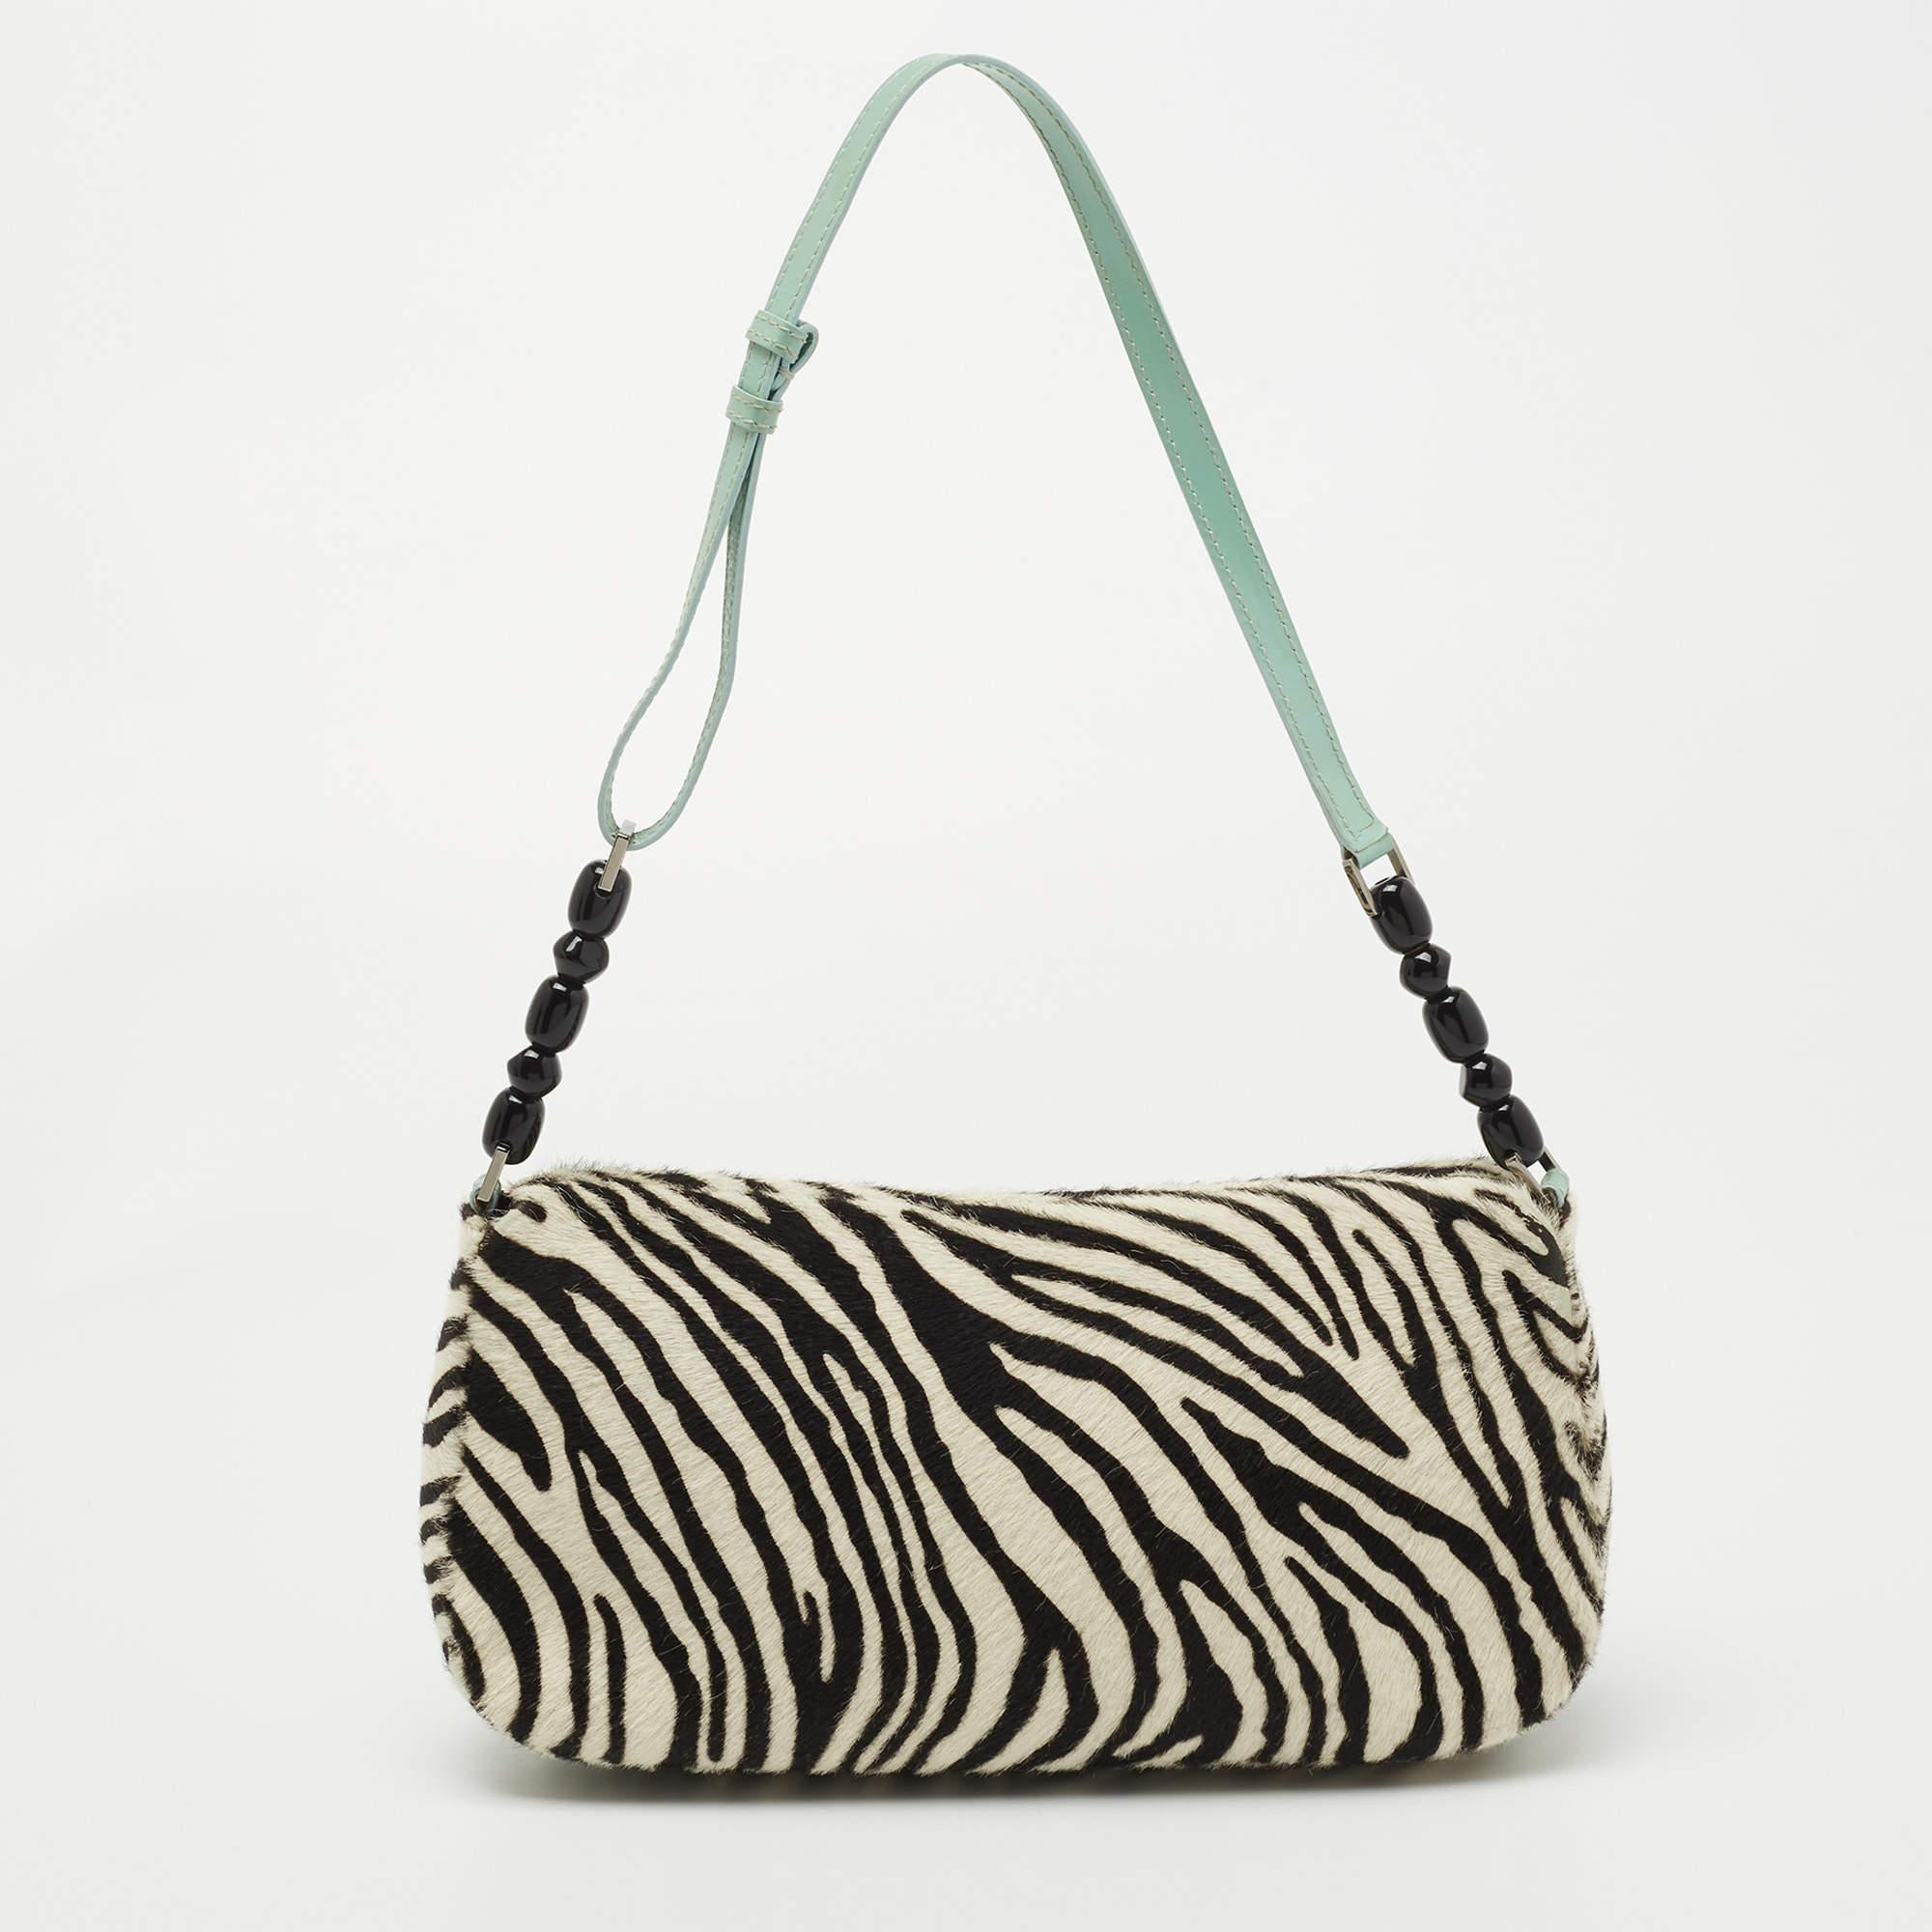 Dior Tricolor Zebra Print Calfhair and Patent Leather Malice Shoulder Bag 1